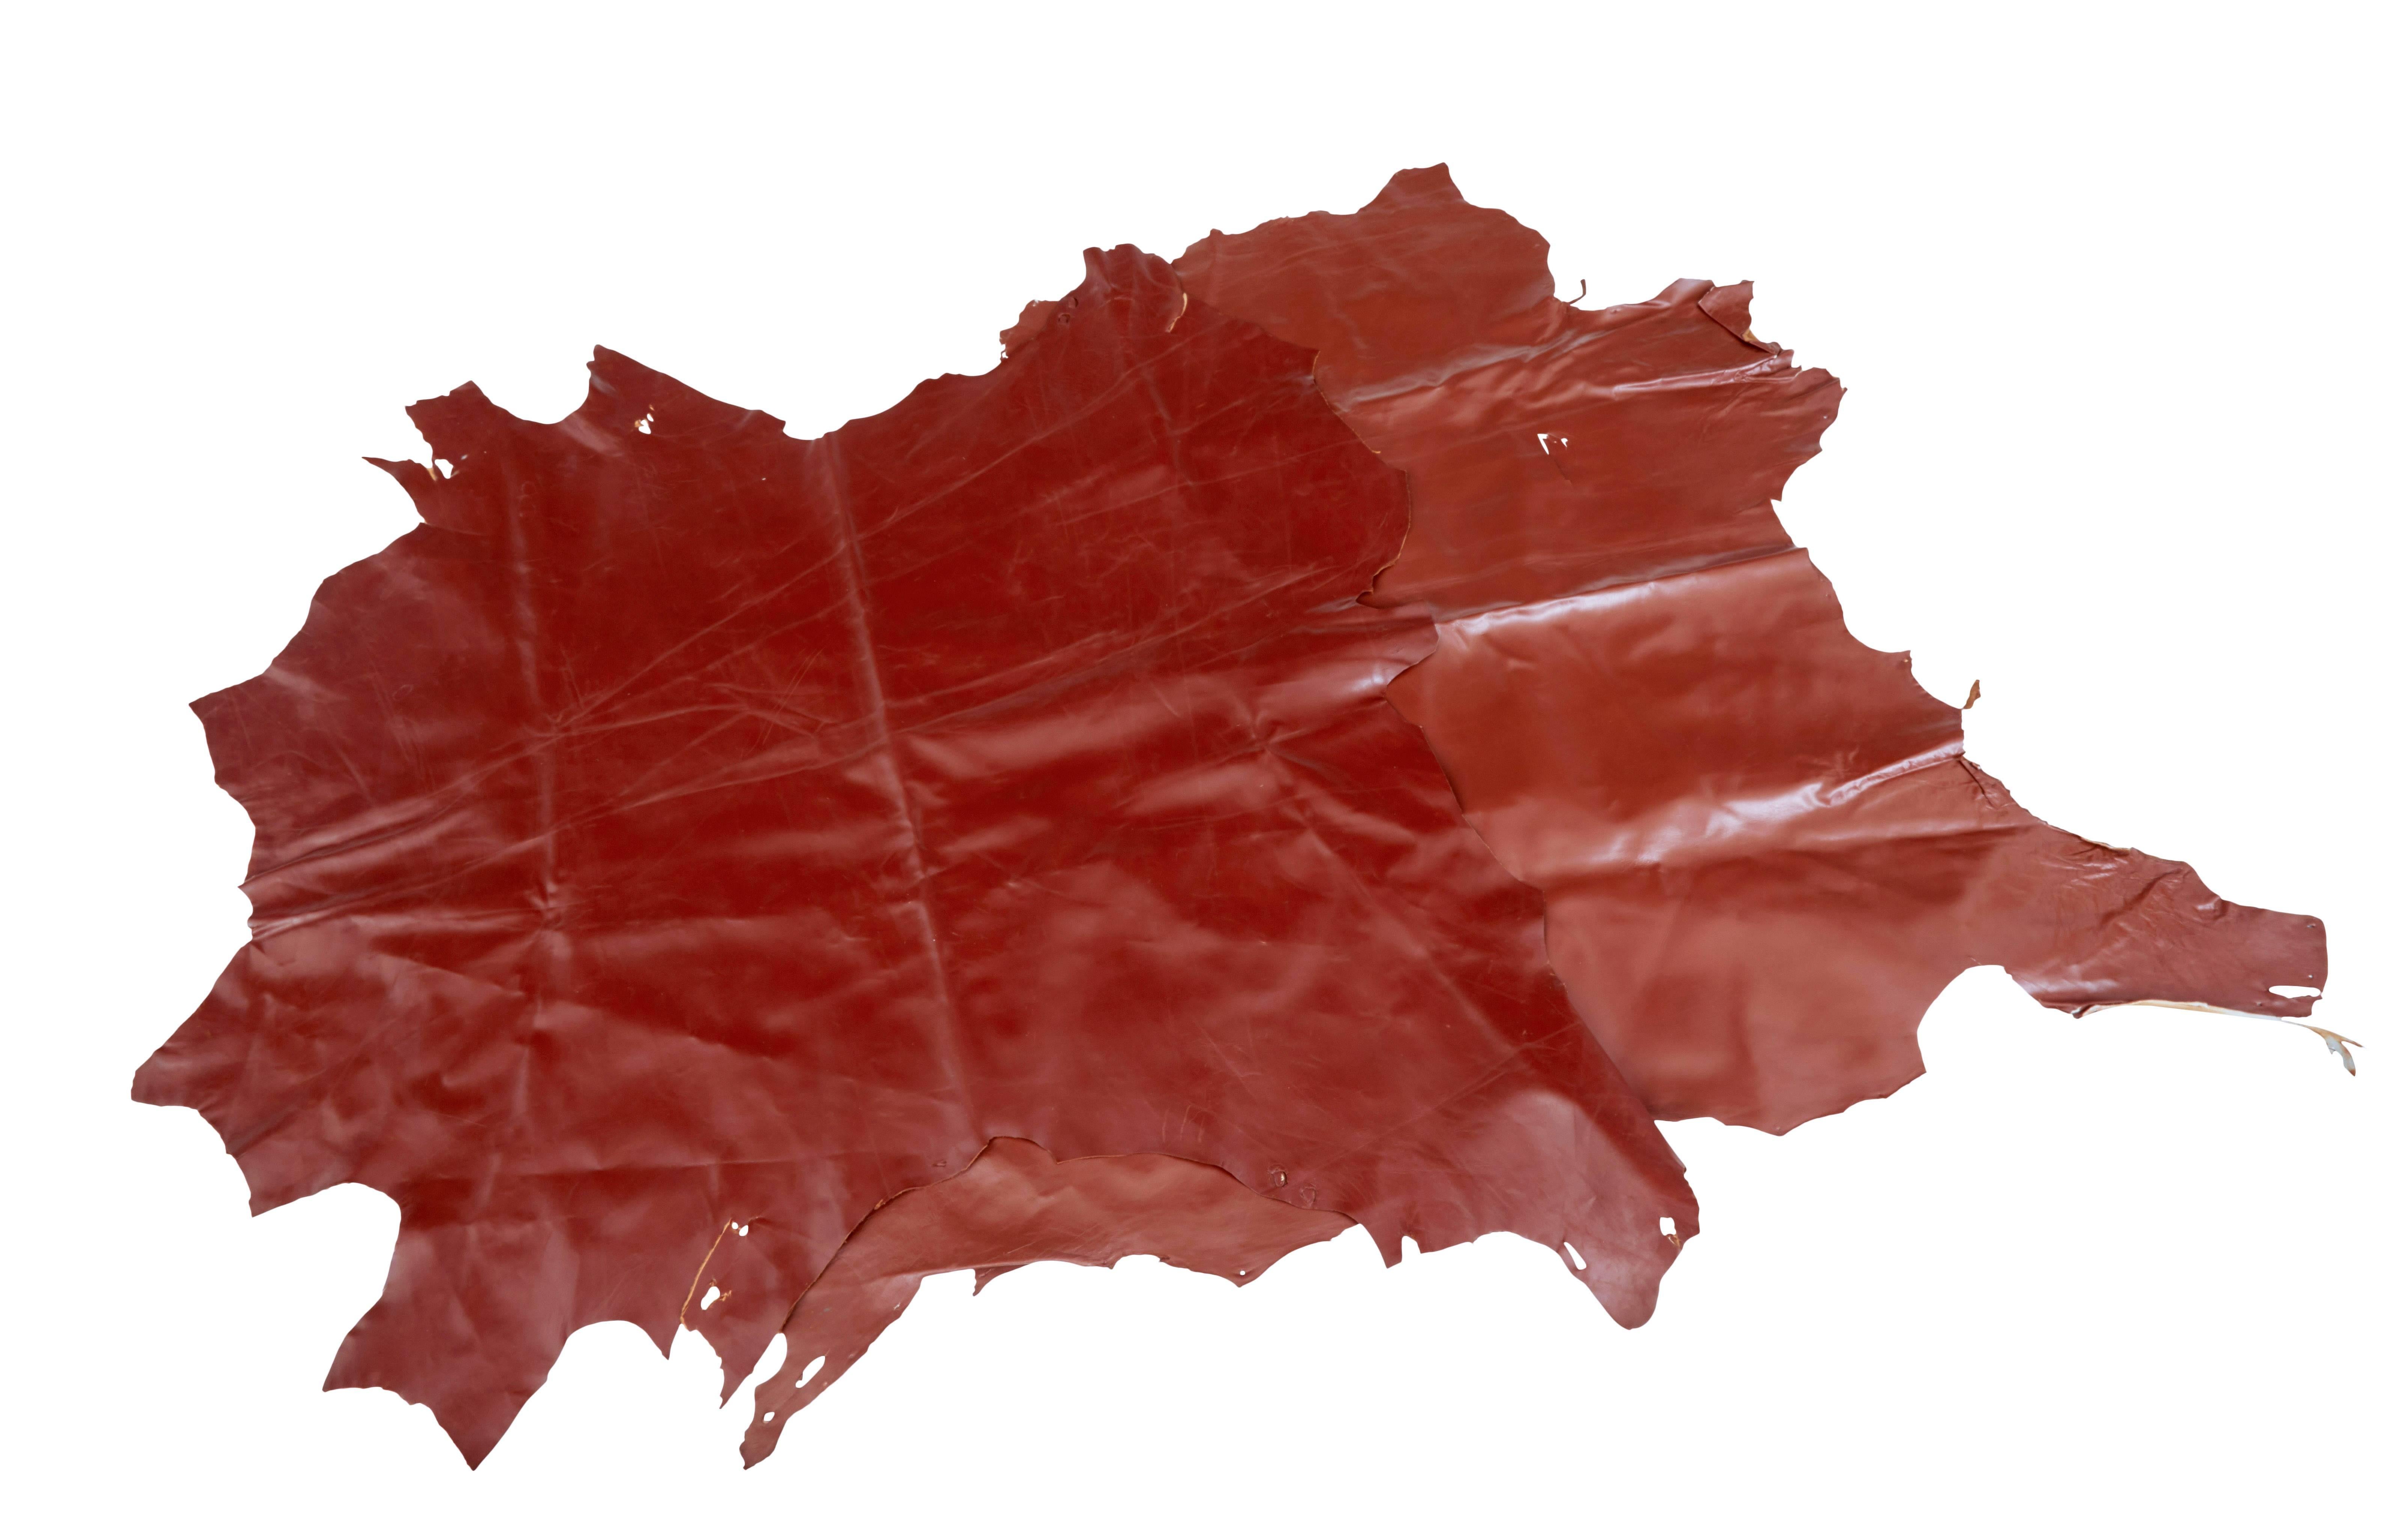 Here we have 16 red cowhide skins for upholstery.

These are three year old skins and in good condition.

Largest is 52